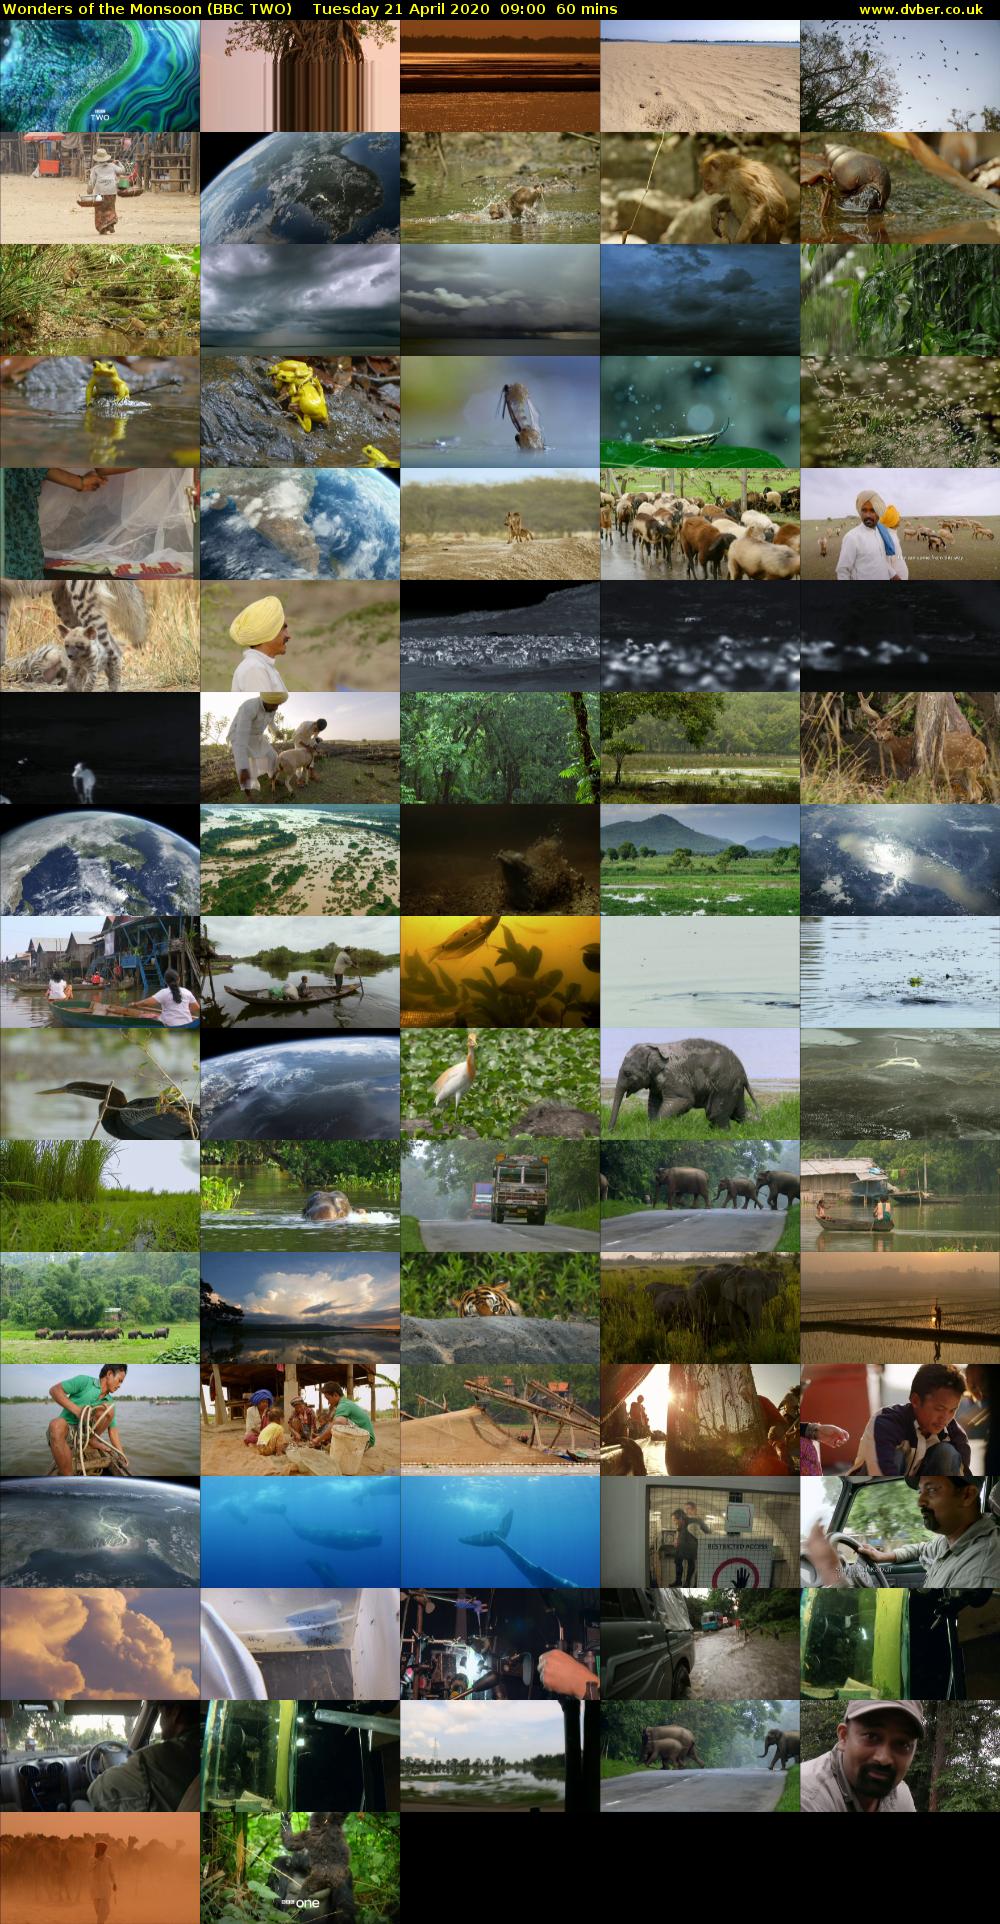 Wonders of the Monsoon (BBC TWO) Tuesday 21 April 2020 09:00 - 10:00